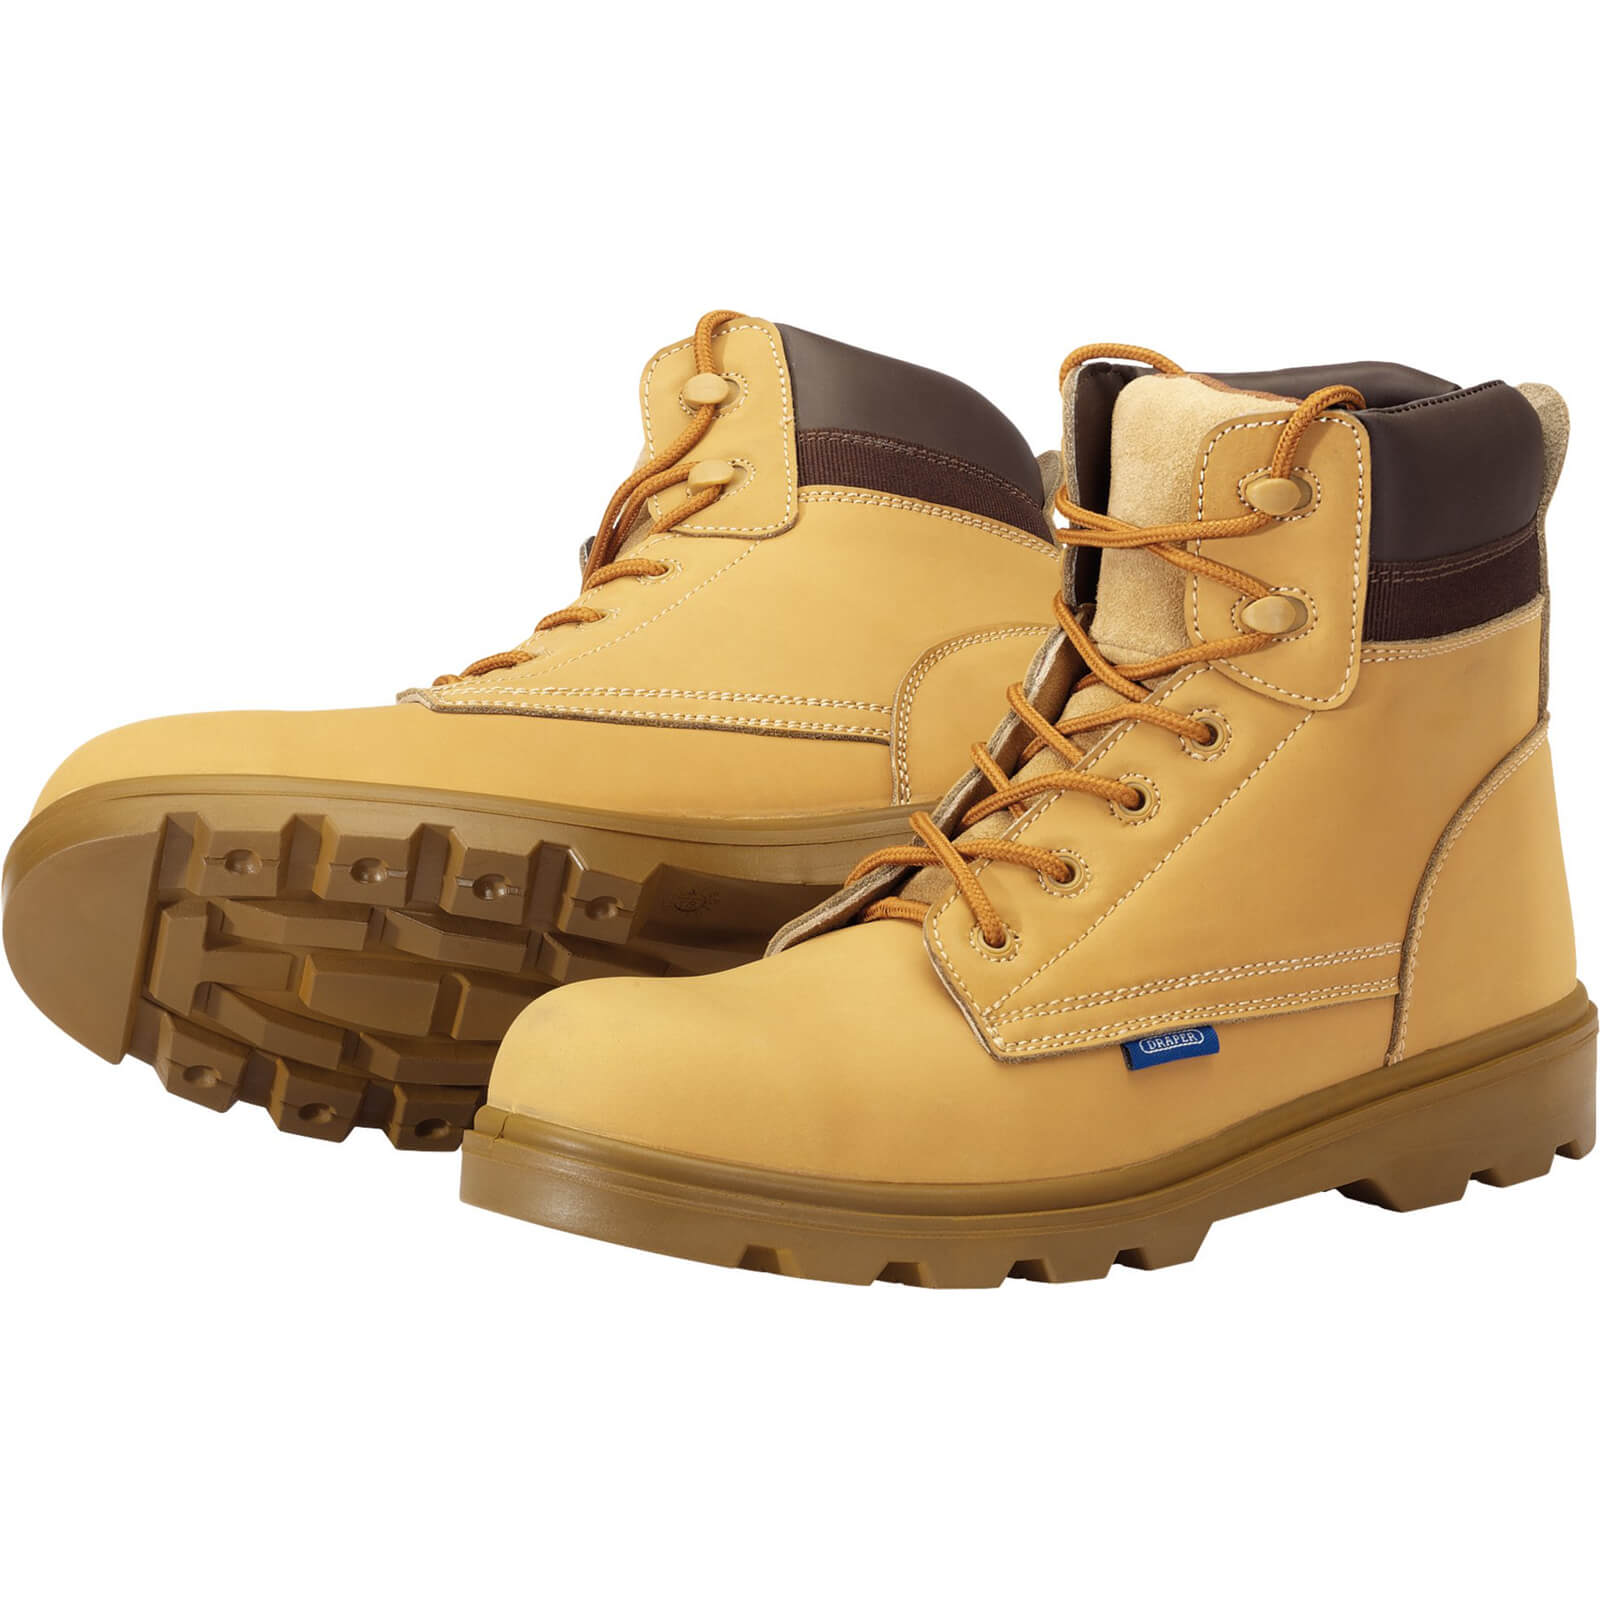 Image of Draper Mens Nubuck Style Safety Boots Tan Size 12